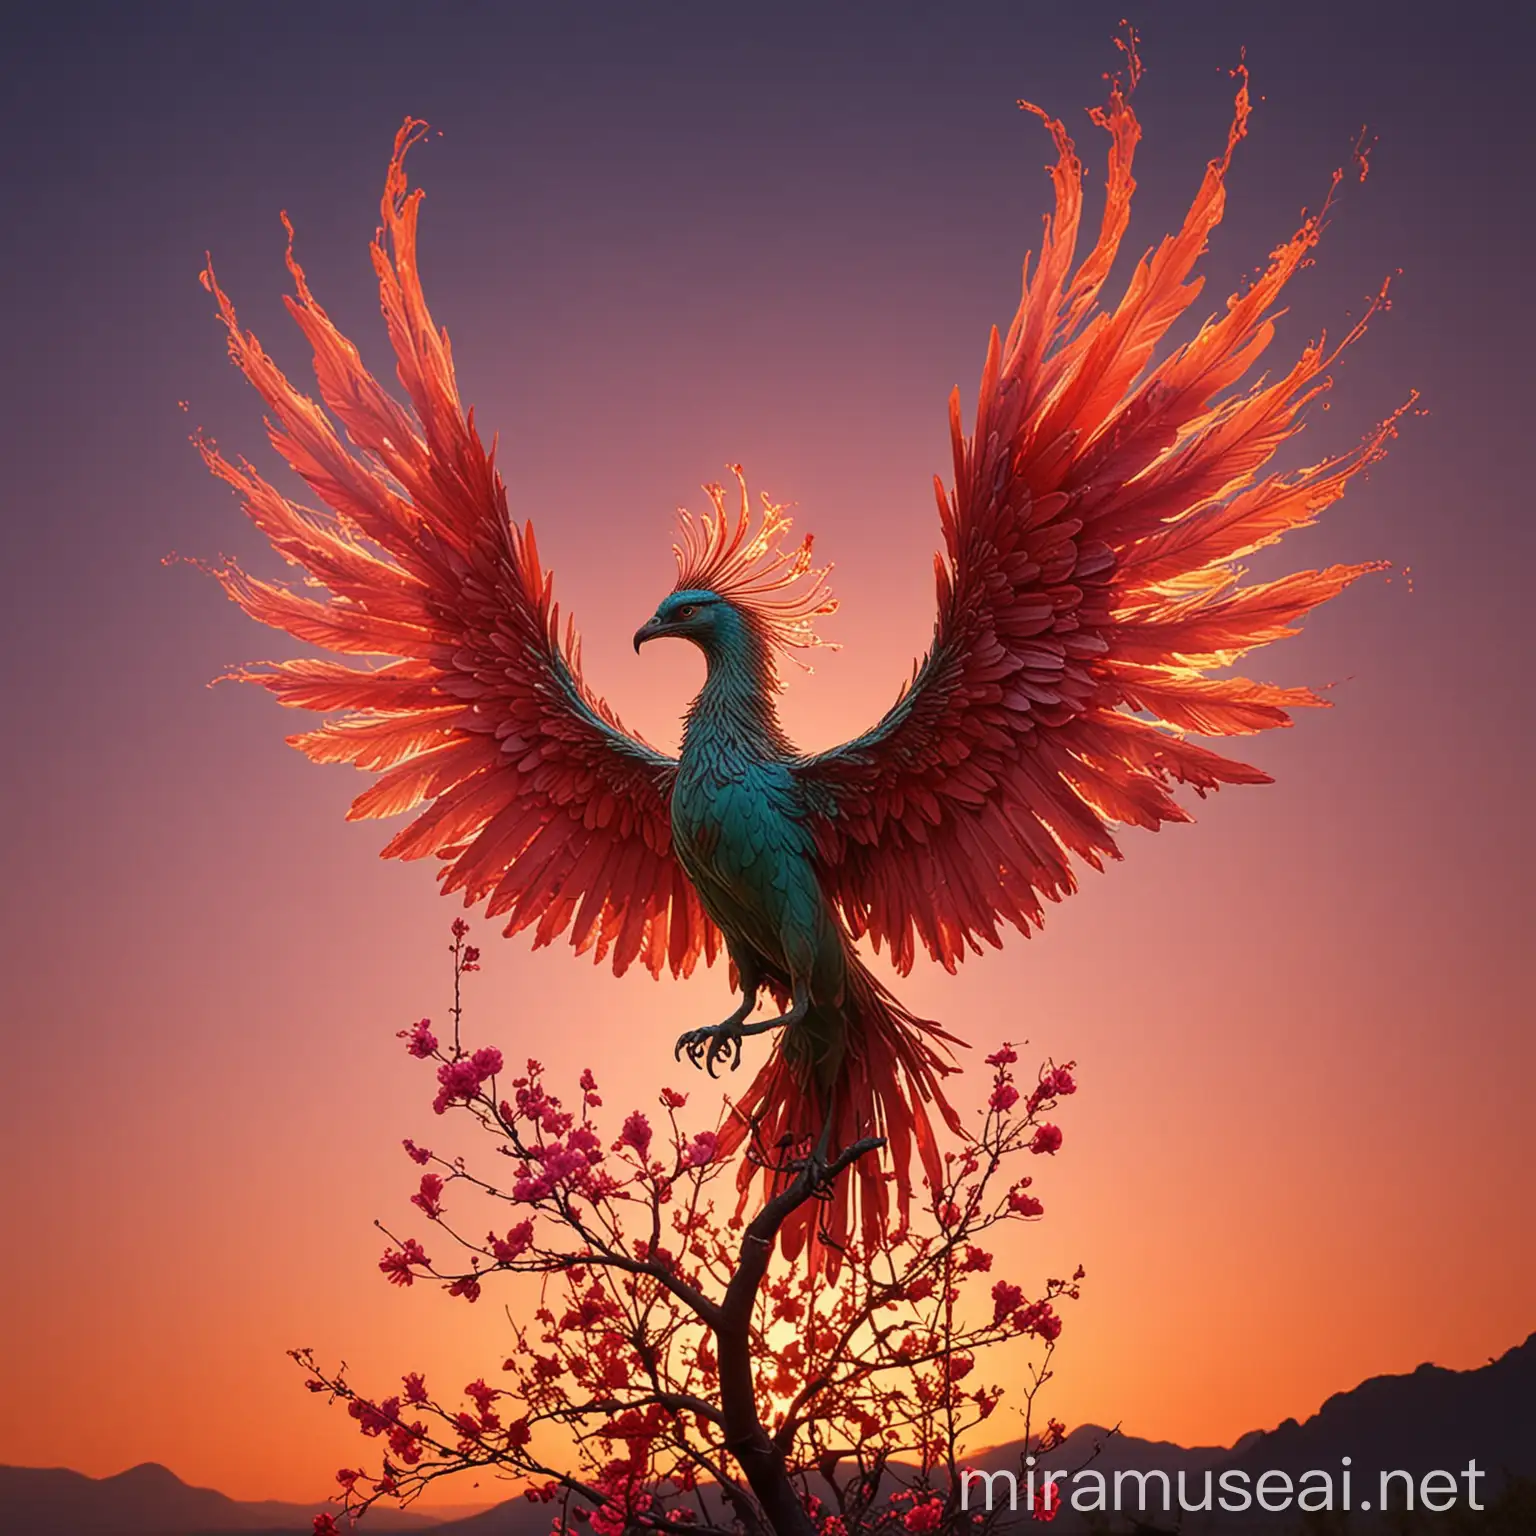 type: Phoenix_Blossom
name: "Phoenix Blossom: Transformation and Liberation"
description: |
    A beautiful and abstract image of a phoenix blooming from its ashes, undergoing a graceful transformation.
properties:
    - state: Flight
    - environment: Serene Nature
    - colors:
        Phoenix: "#FF4500"  # Orange
        Sky: "#87CEEB"  # Sky Blue
        Surroundings: "#008000"  # Green
        Blossom: "#FF69B4"  # Hot Pink
    - theme: Transformation and Liberation from Addiction
    - message: Symbol of hope and motivation for embarking on a new path in life
    - social_supporters:
        - Phoenix: "Support Group"
        - Sky: "Rehabilitation Center"
        - Surroundings: "Community Outreach Program"
        - Blossom: "Therapist"